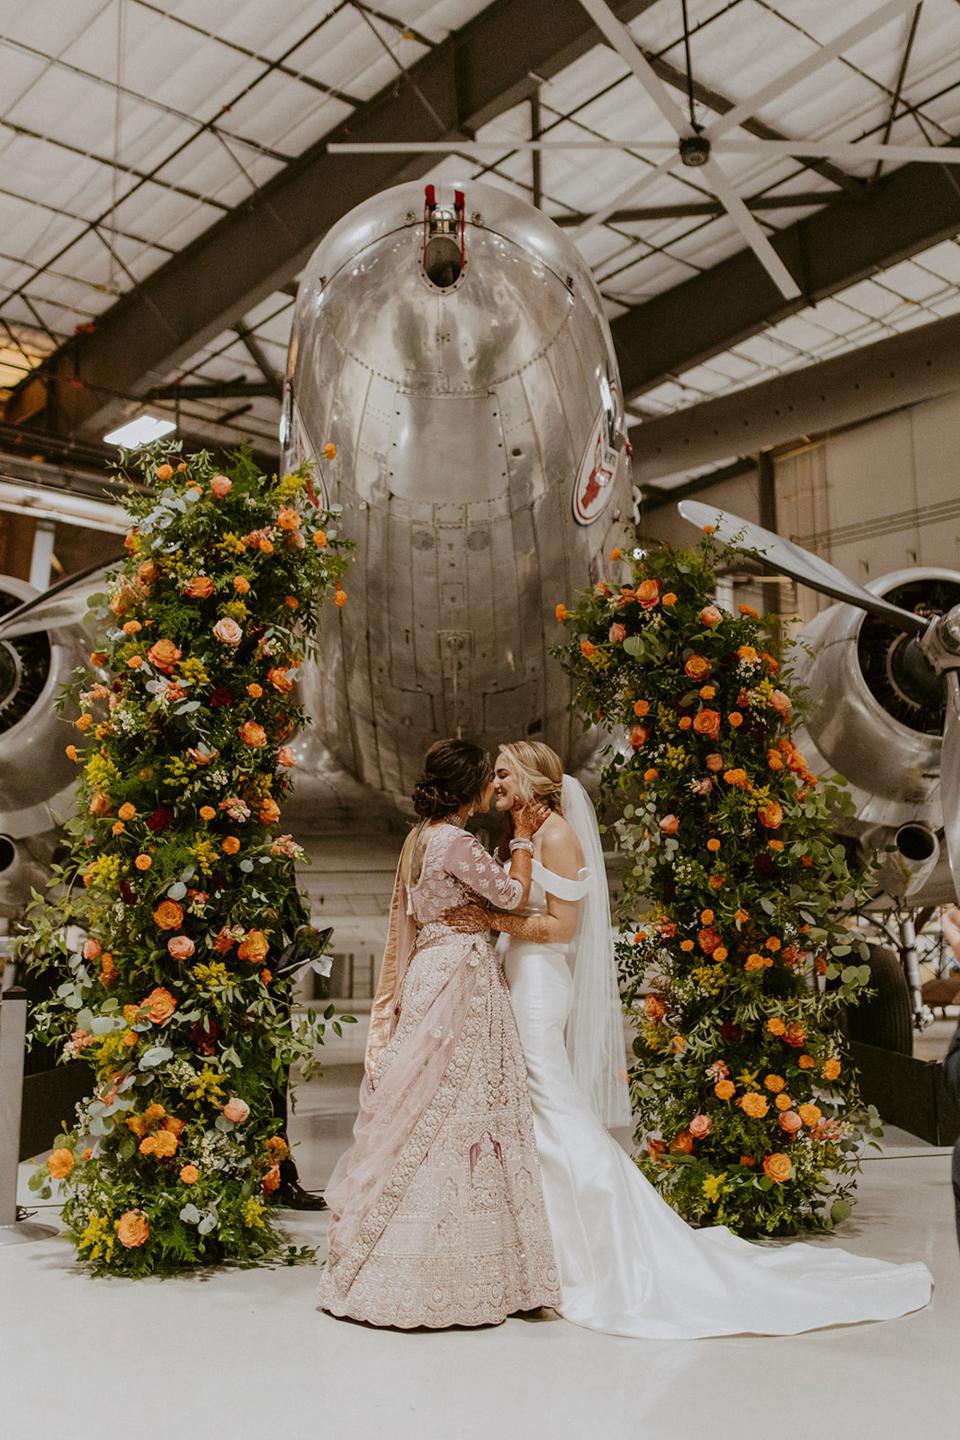 Two brides kiss at their wedding altar surrounded by a floral archway in front of a plane.